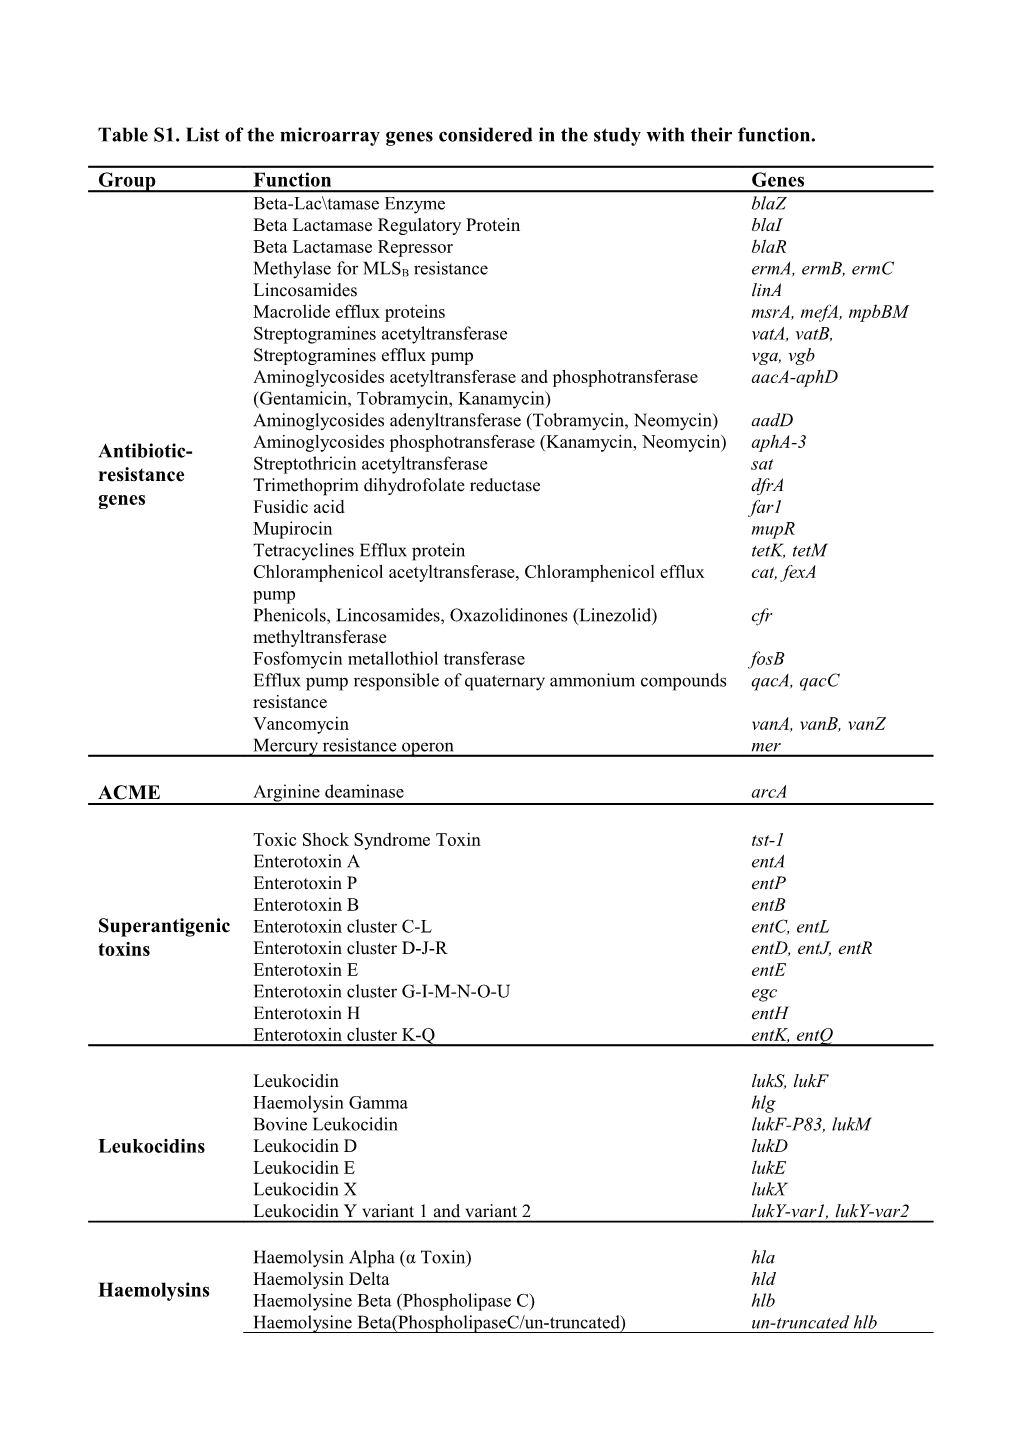 Table S1. List of the Microarray Genes Considered in the Study with Their Function